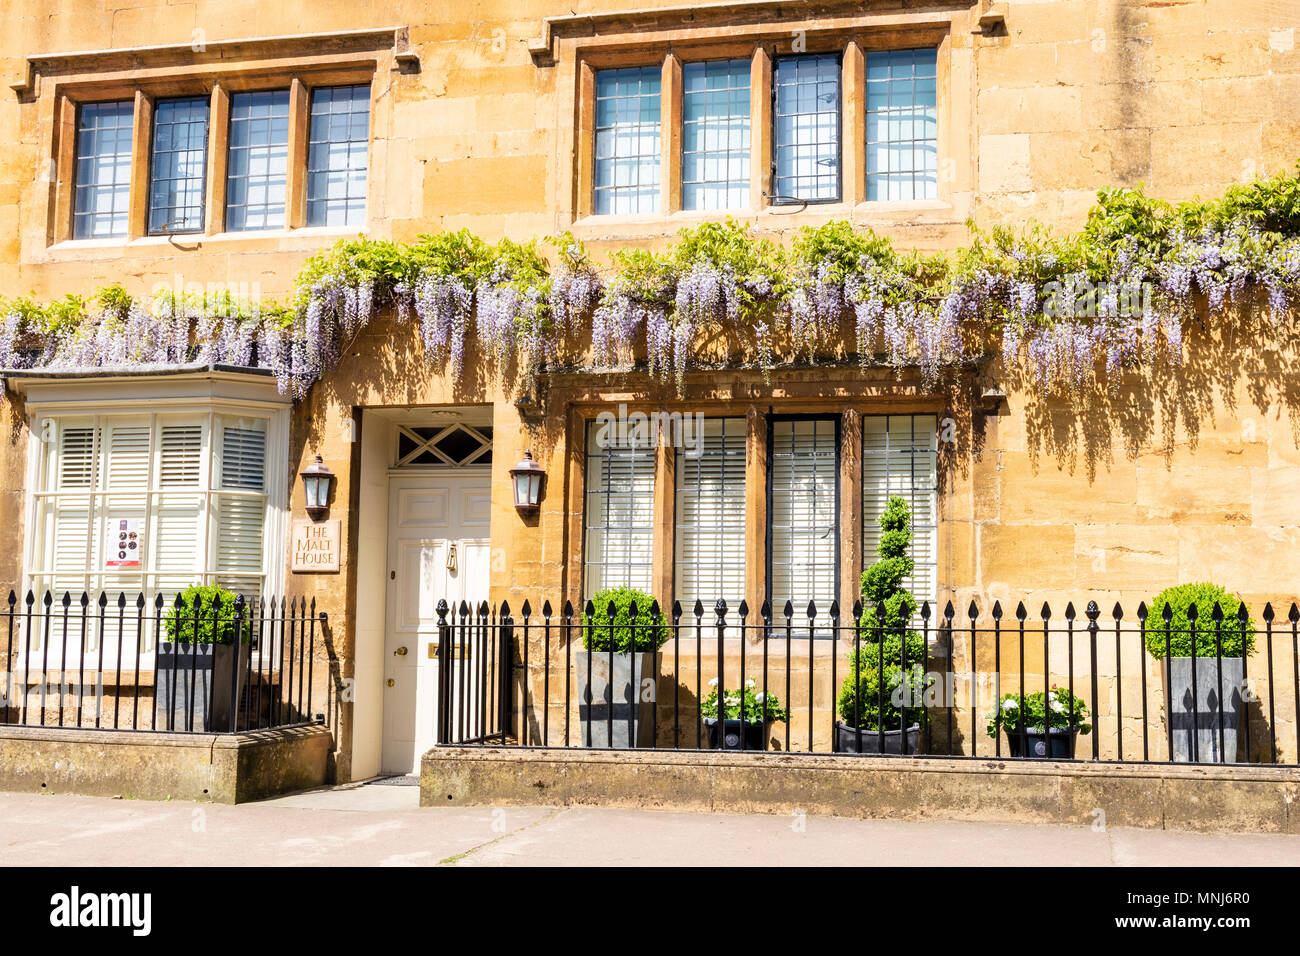 Wisteria flowers on a Cotswold stone building in Chipping Campden, Cotswolds, England, UK. Stock Photo